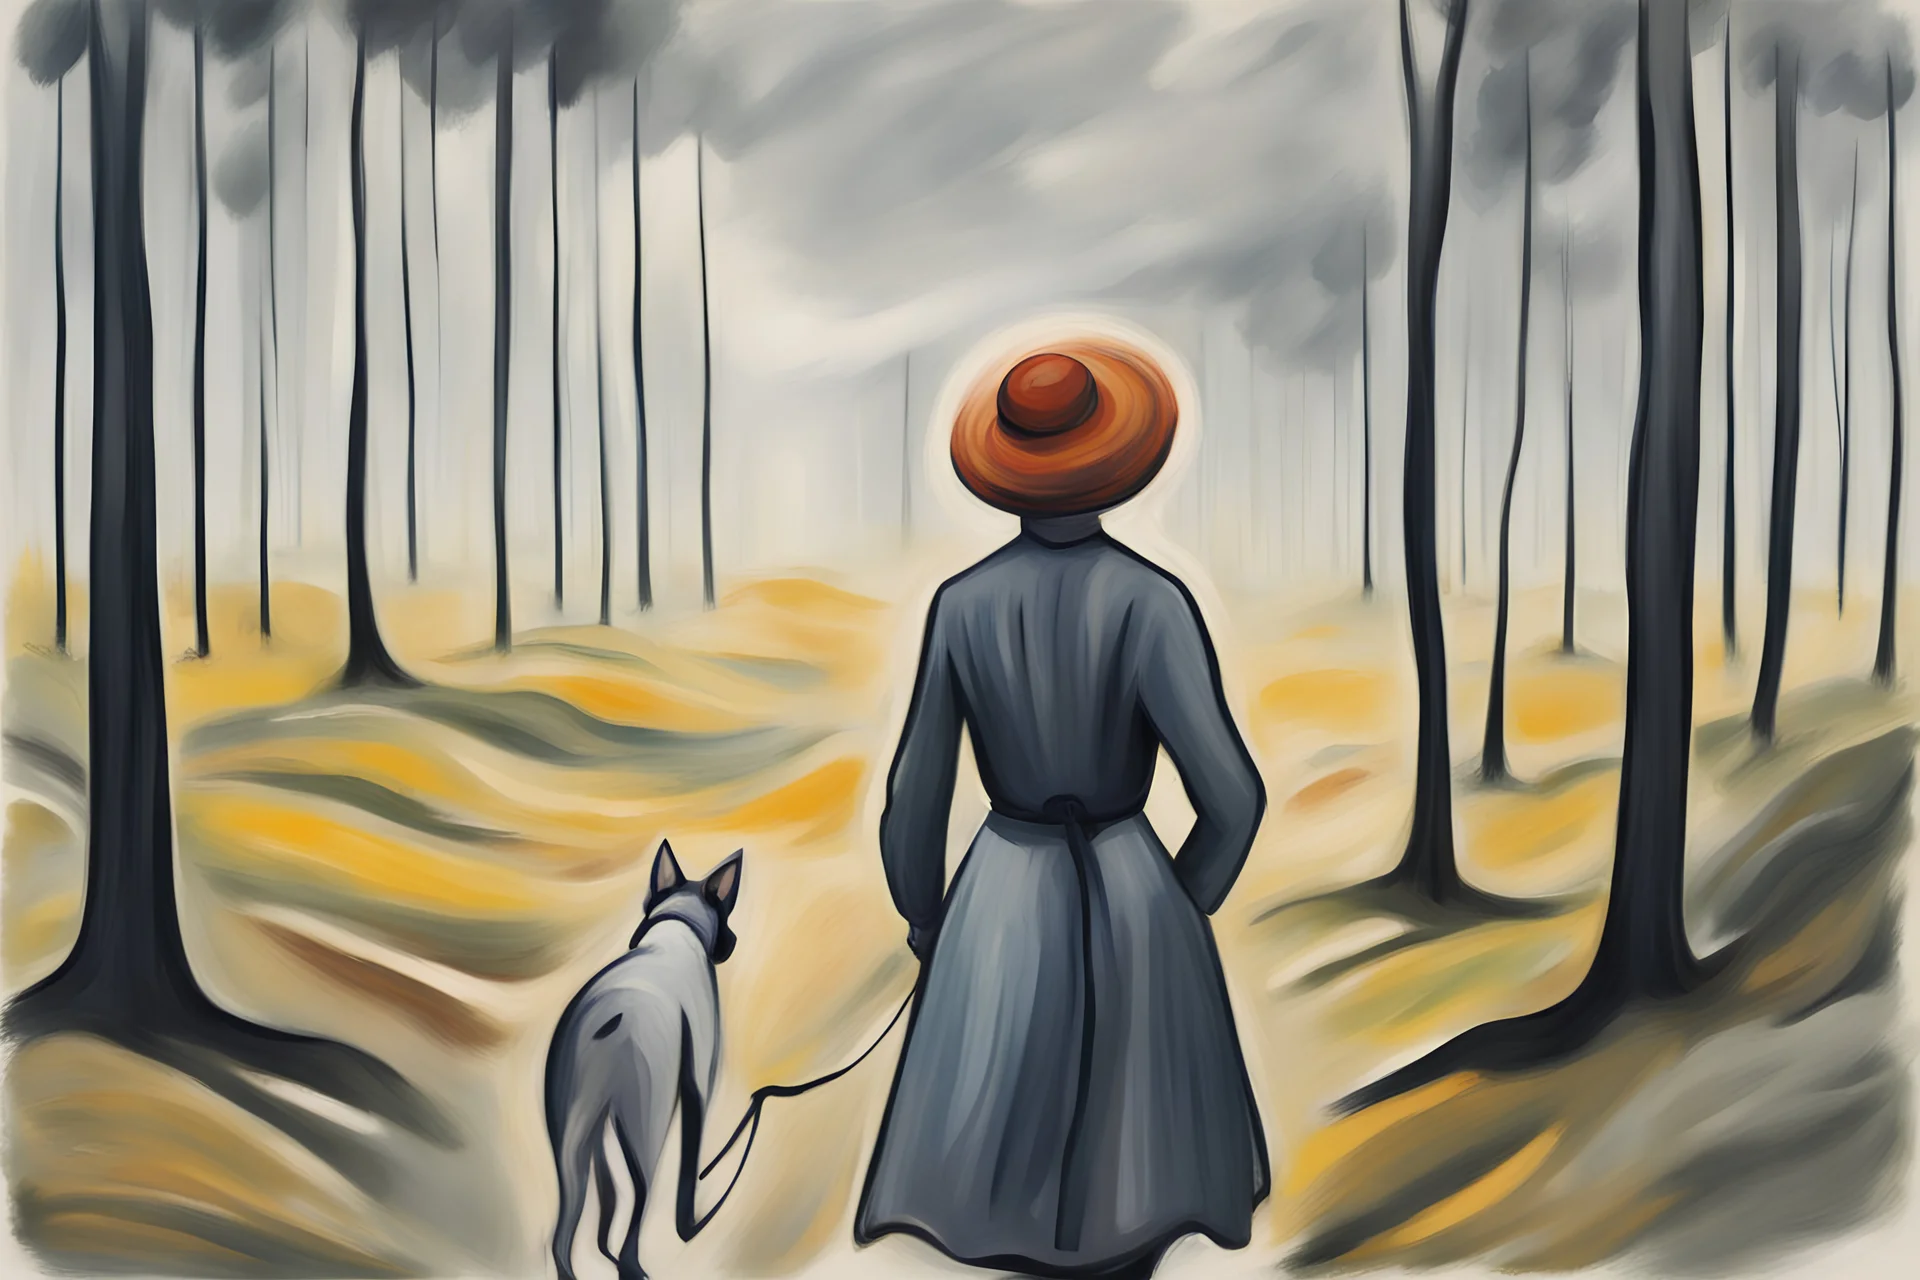 polish woman walking with her dog in the forest a sun in the sky. The sky is gray and cloudy. edvard munch style.